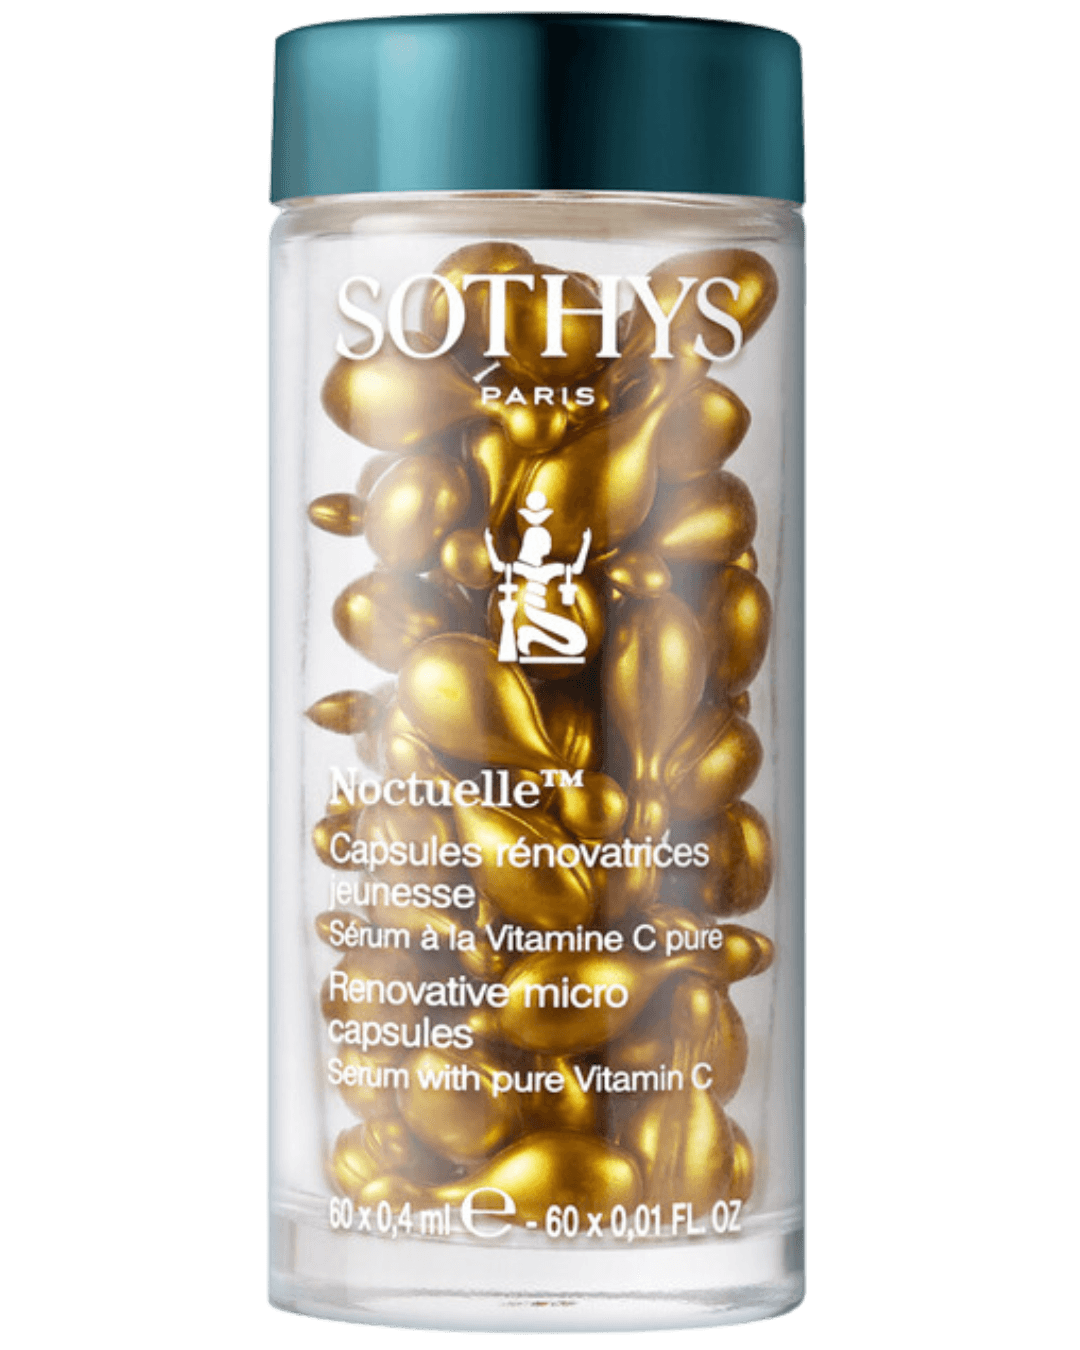 Daily Vanity Beauty Awards 2024 Best Skincare Sothys Renovative Micro Capsules with Pure Vitamin C Voted By Beauty Experts